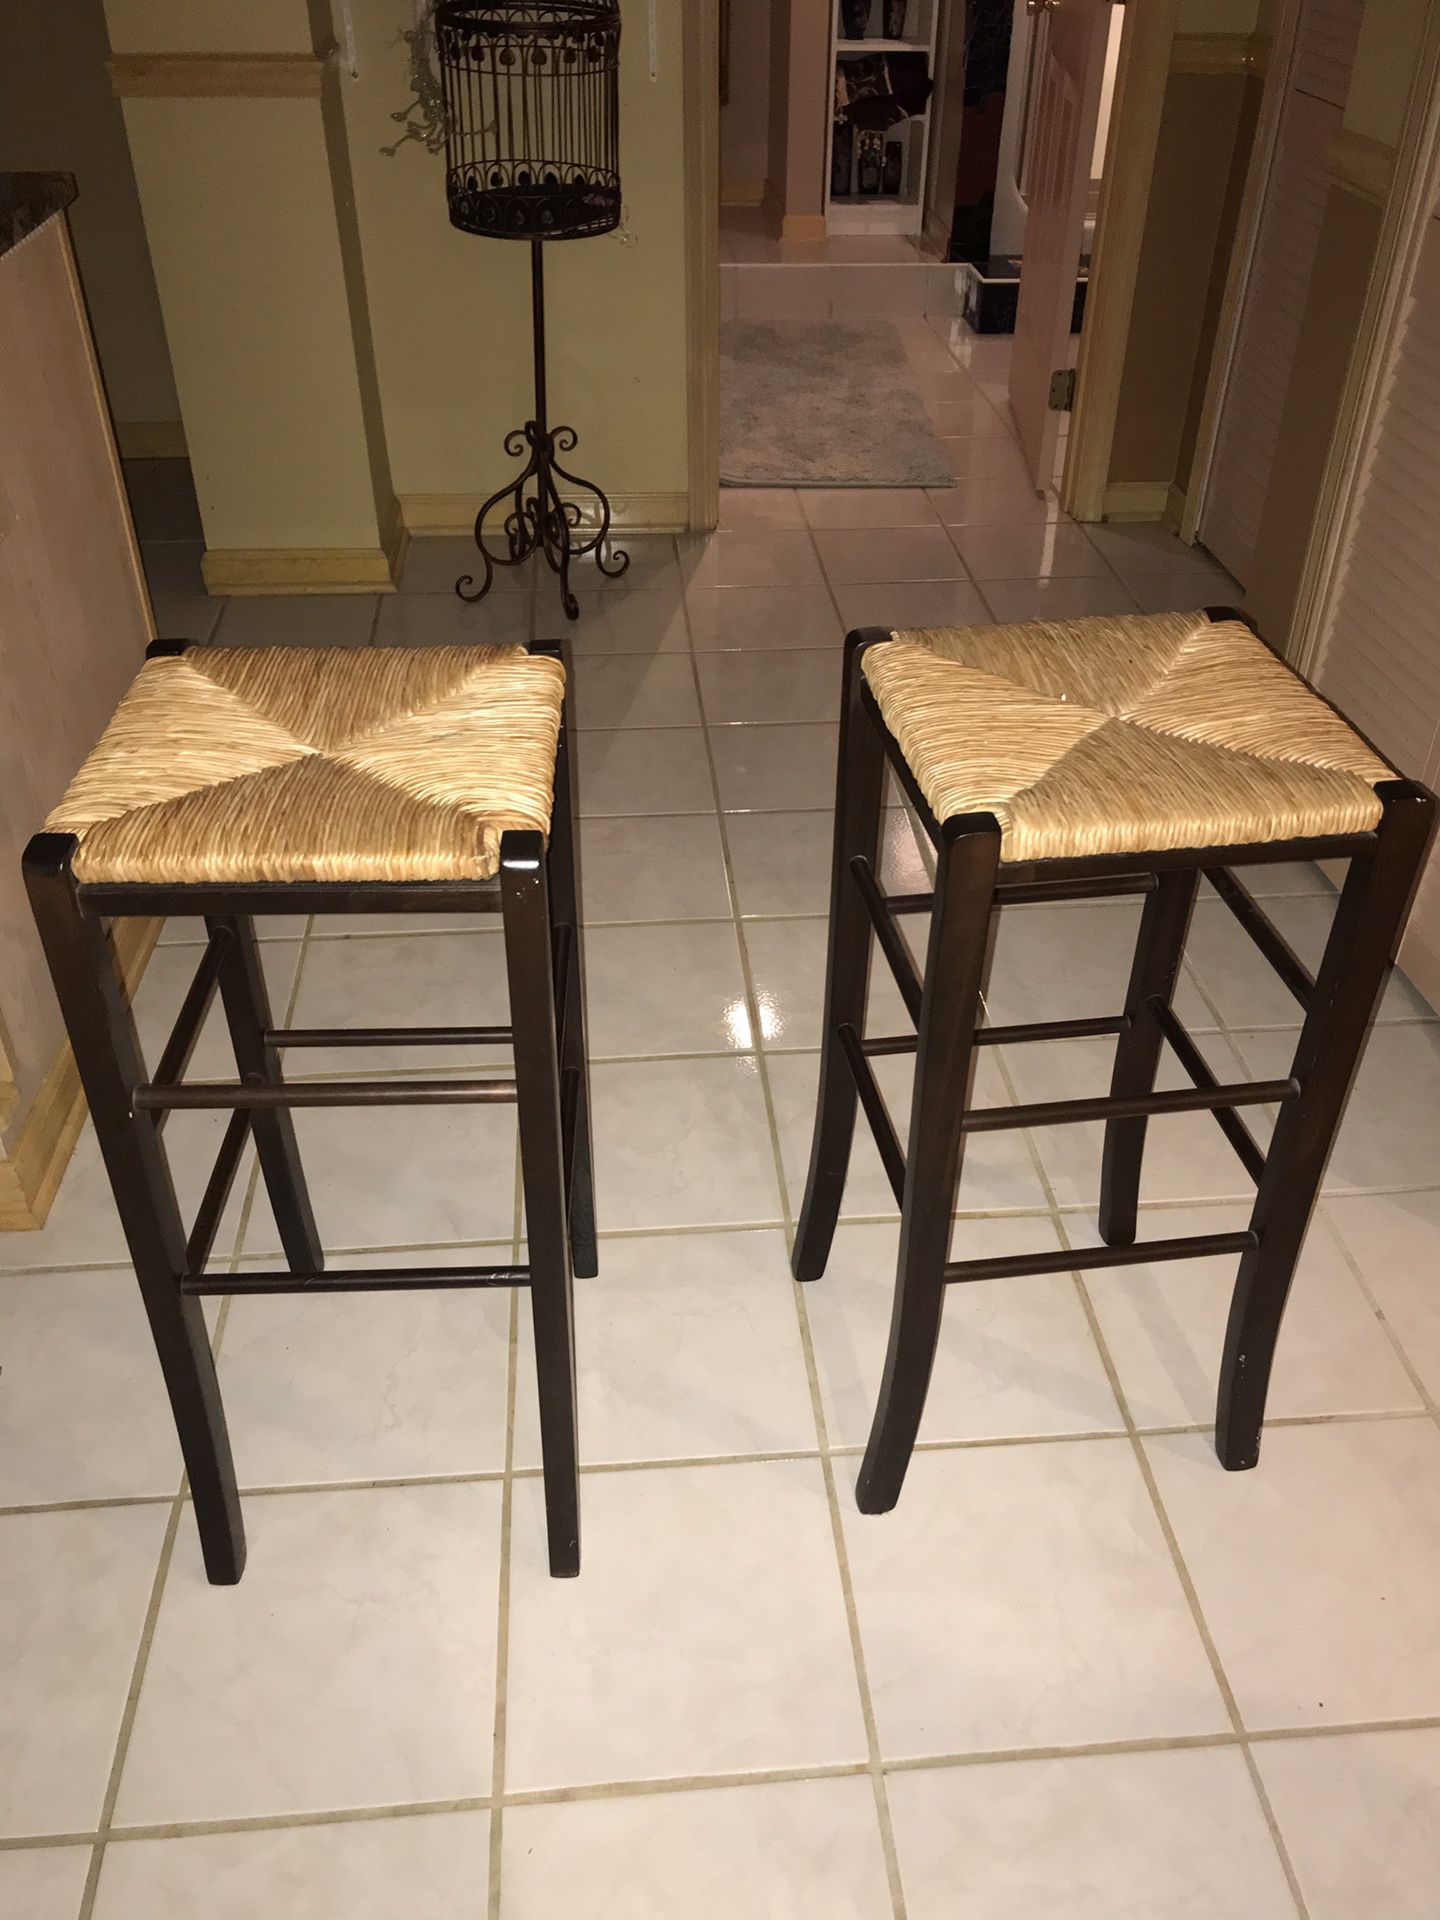 Chairs / stools?